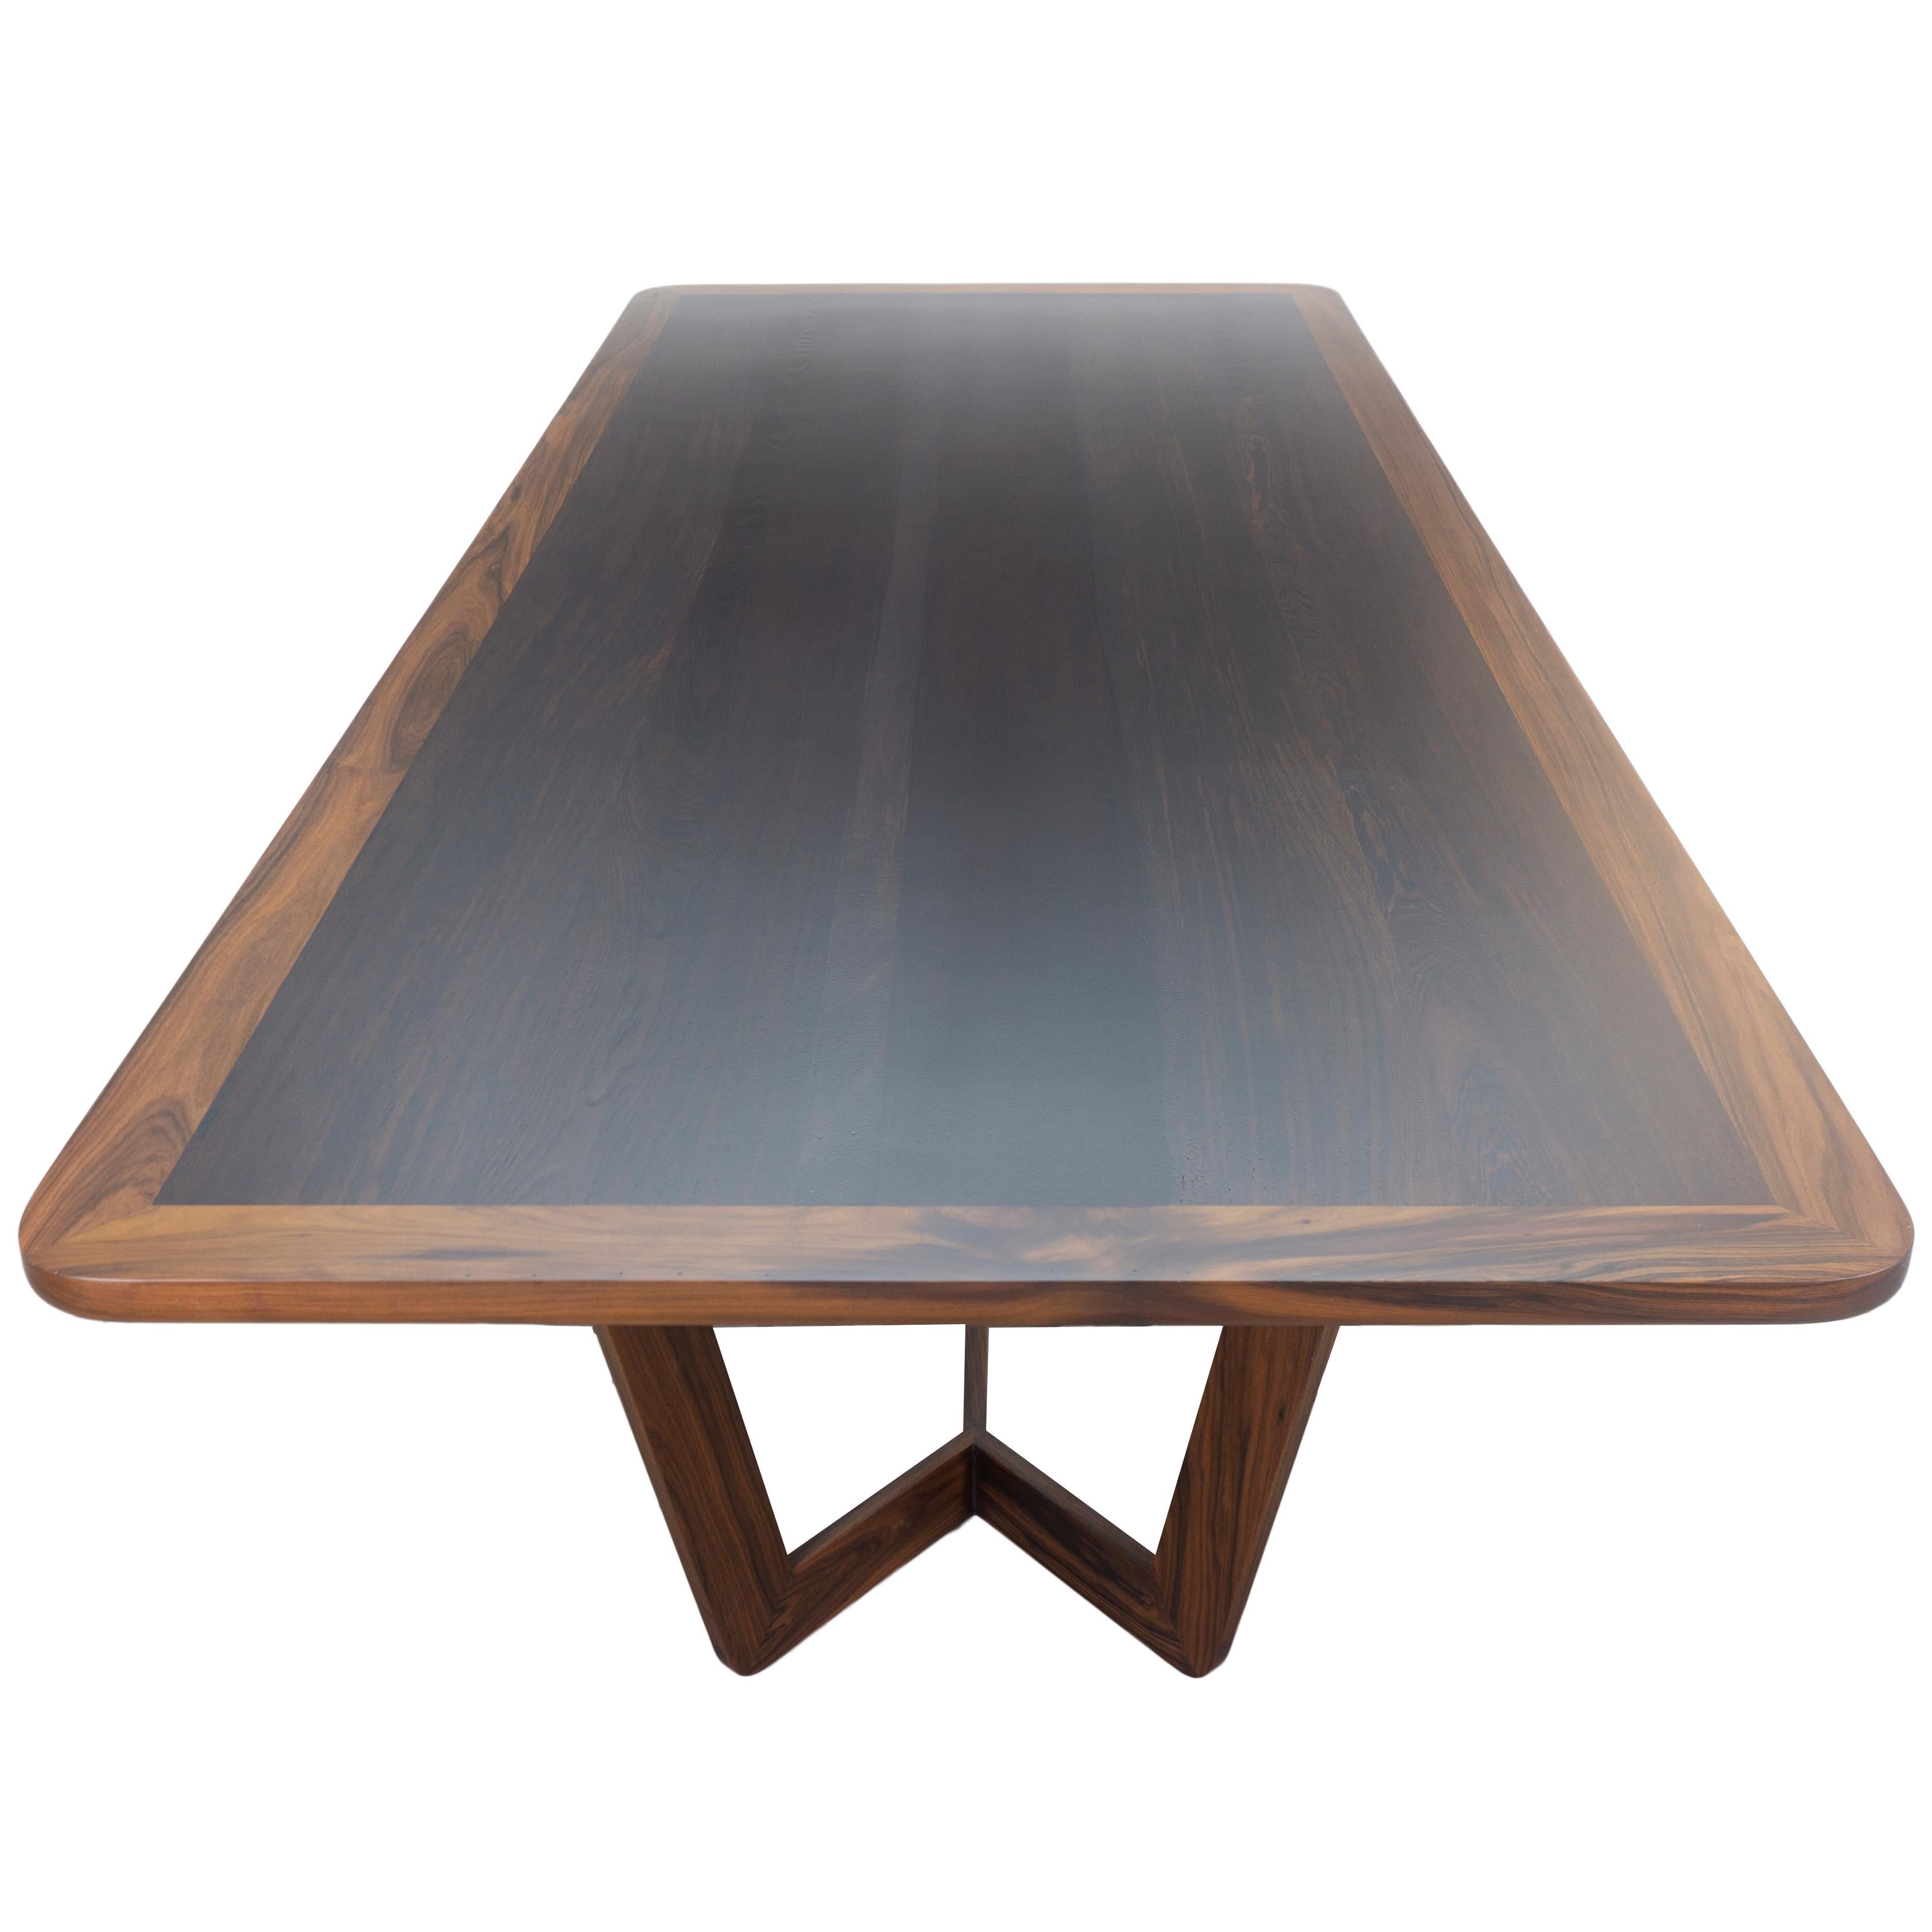 Modern Wooden Dining Table, Customizable In New Condition For Sale In Greenwich, CT